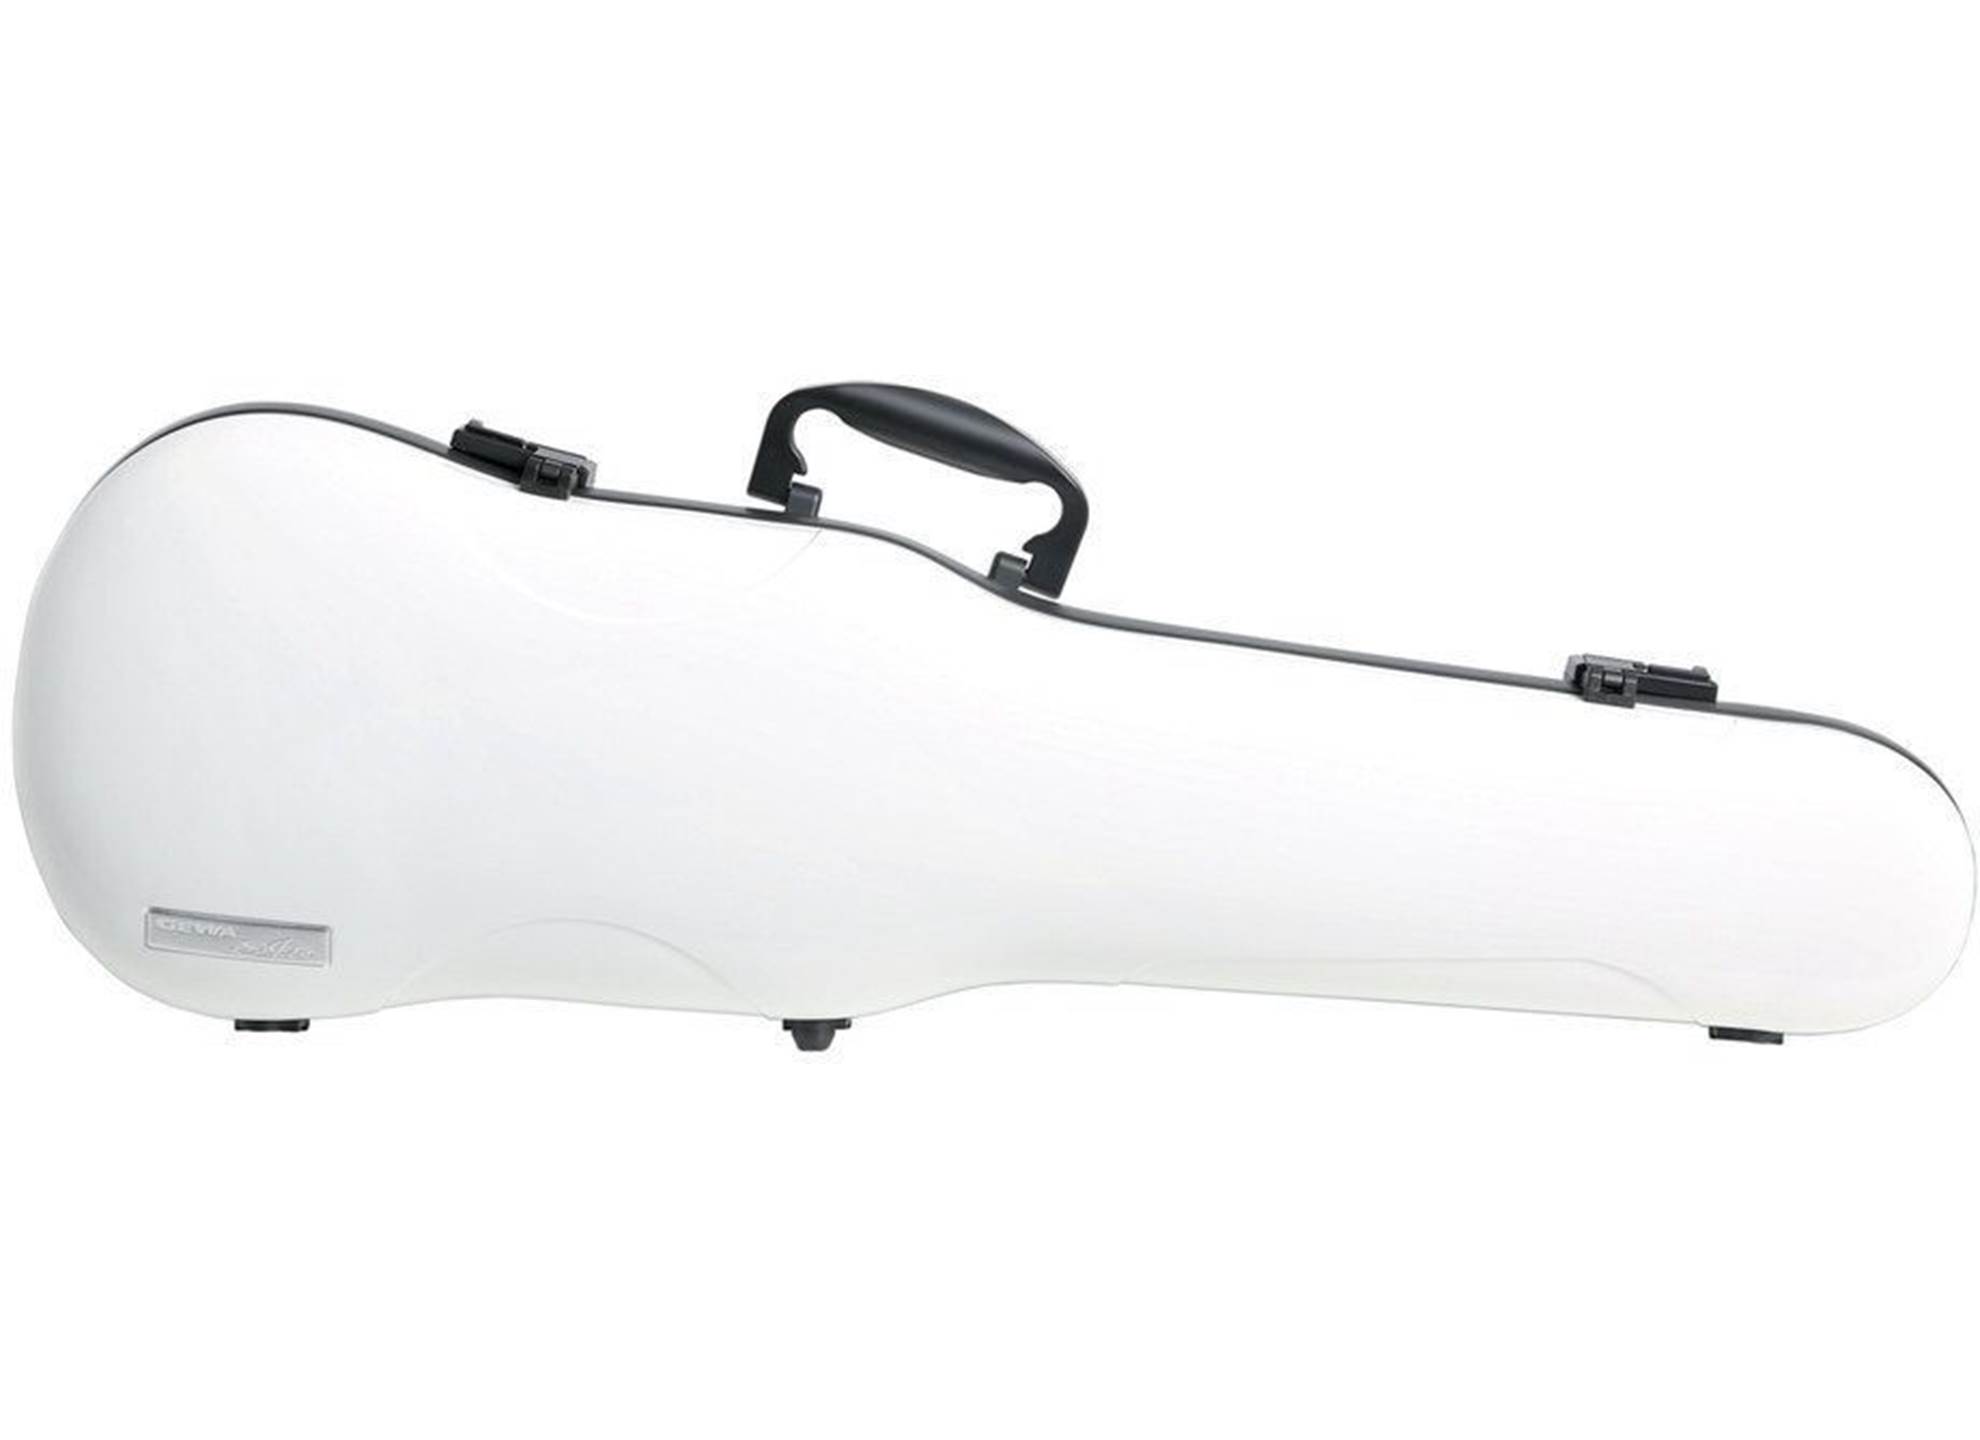 Form shaped violin cases Air 1.7 White